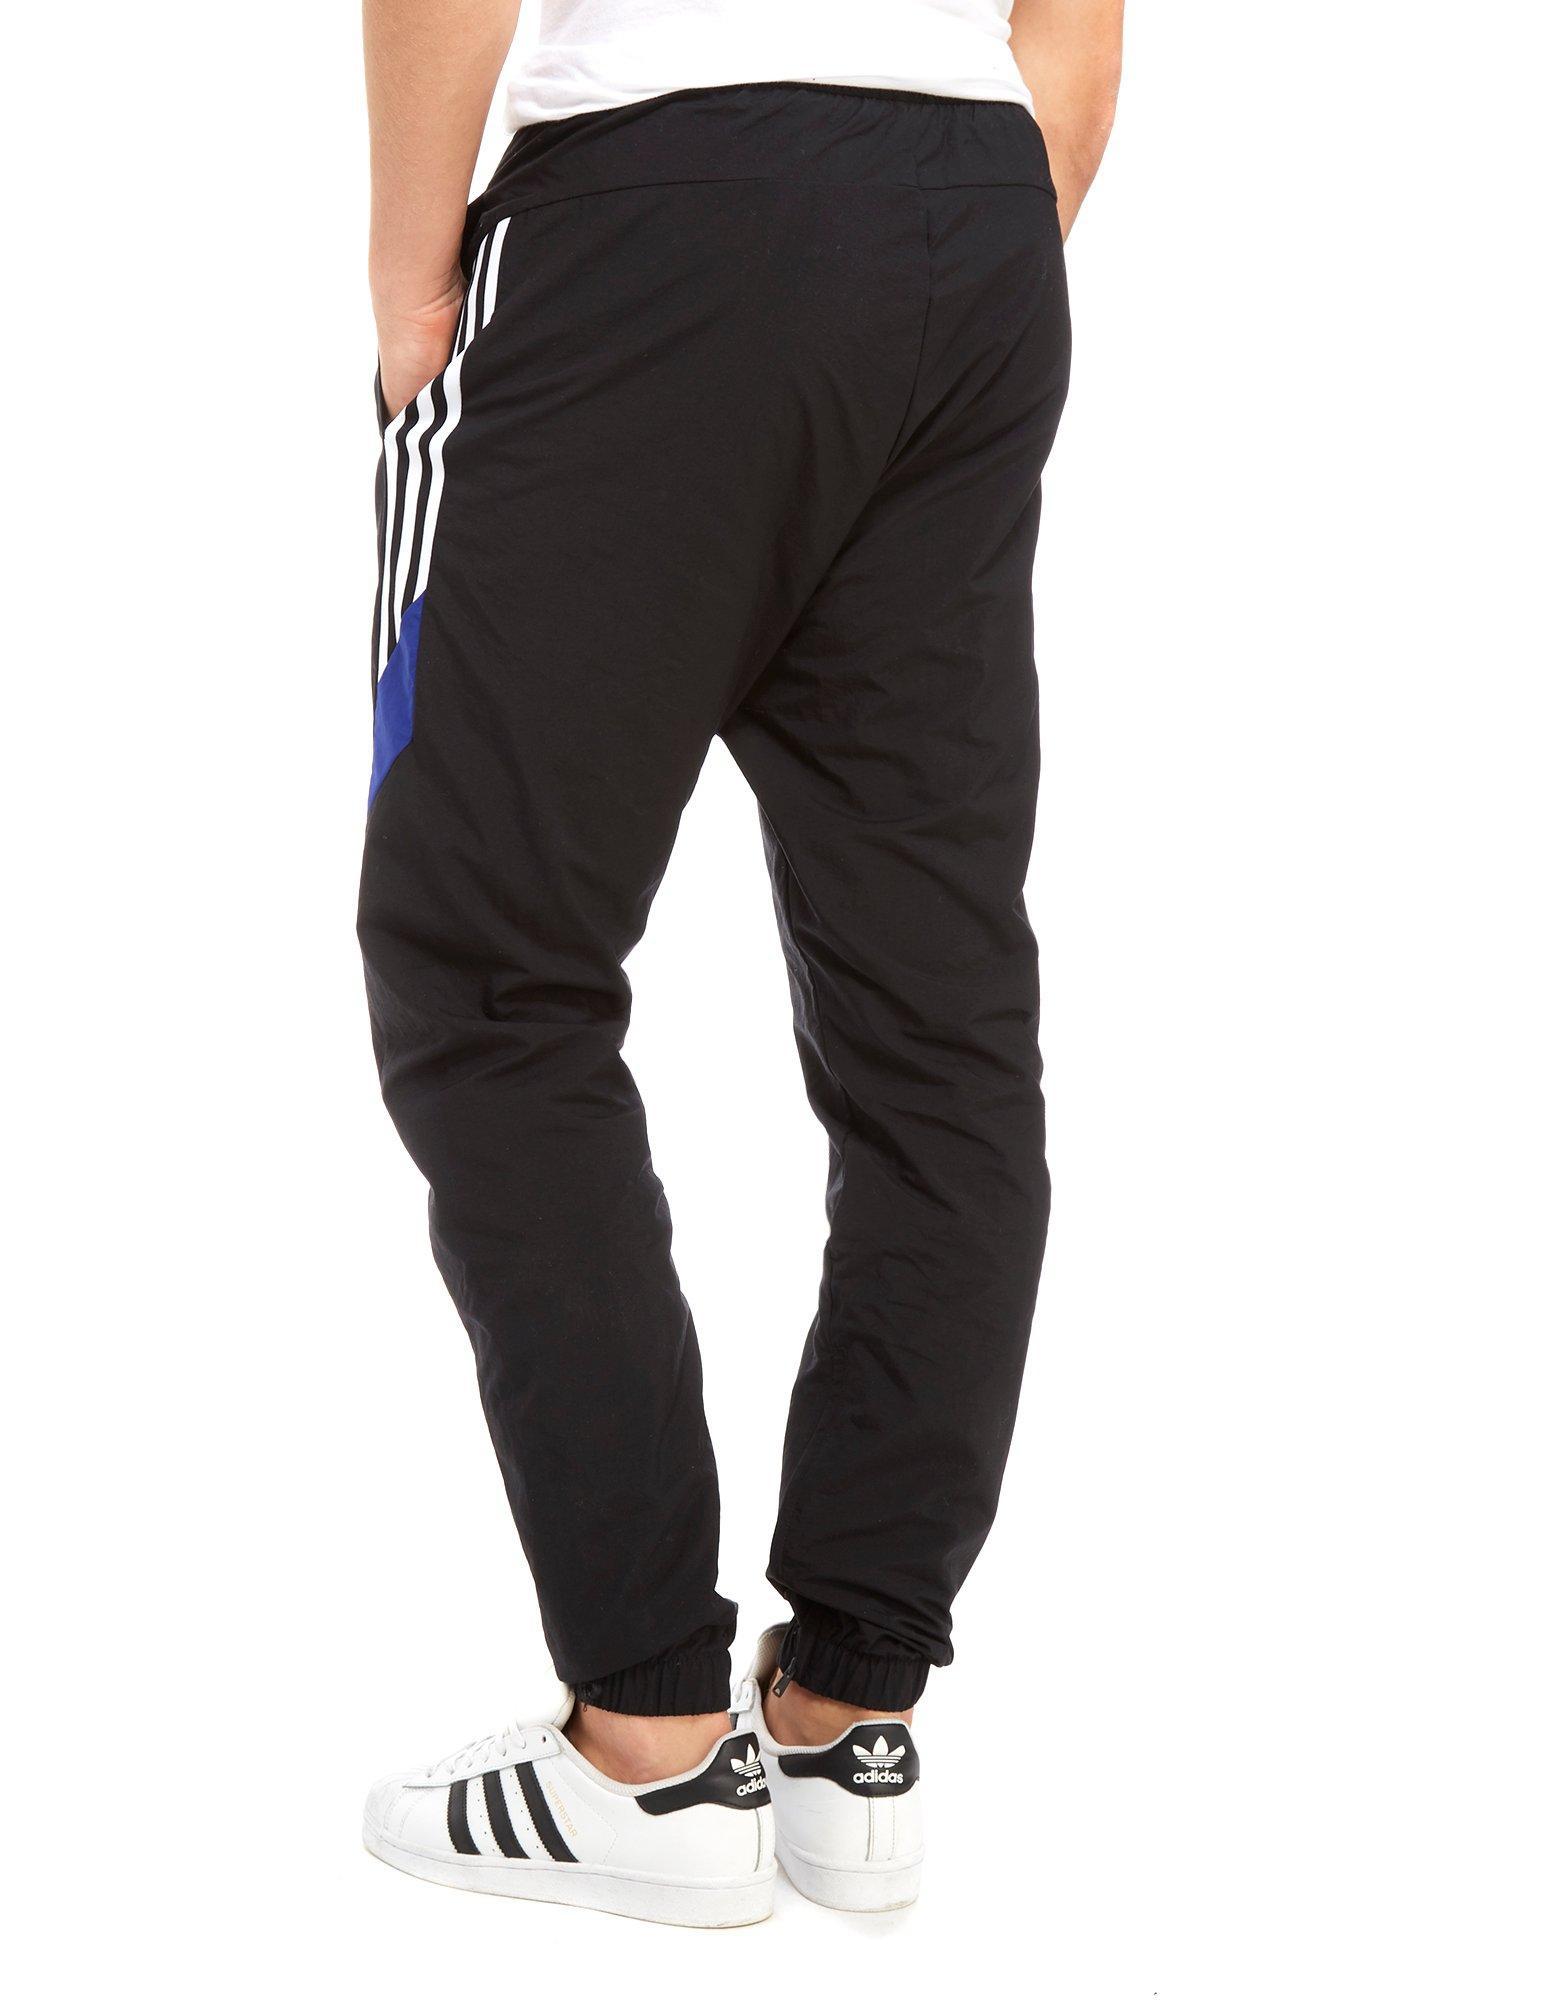 adidas Originals Synthetic Challenger Pants in Black for Men - Lyst